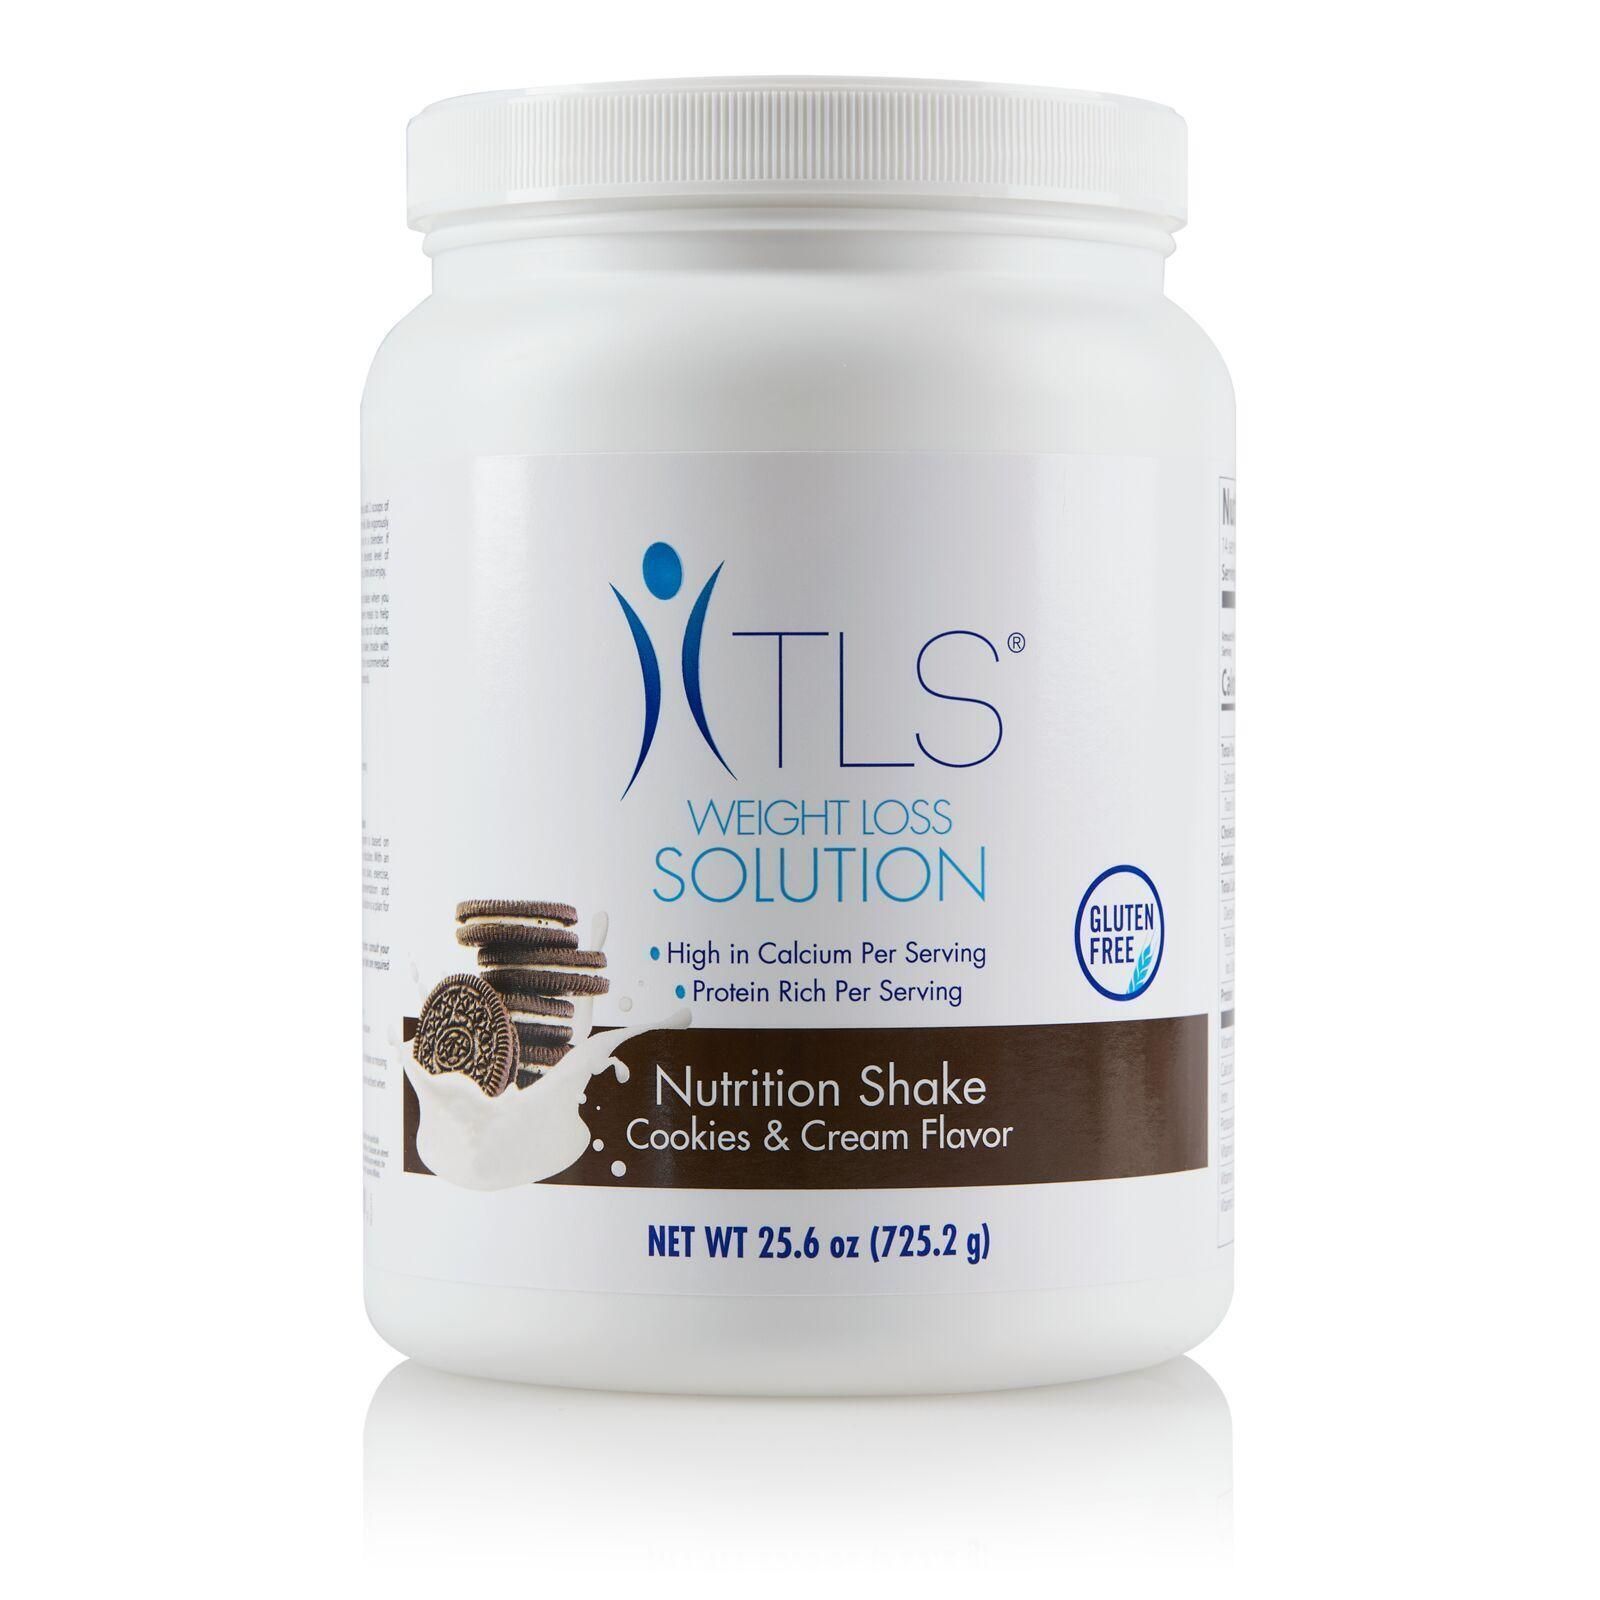 A jar of tls weight loss solution nutrition shake